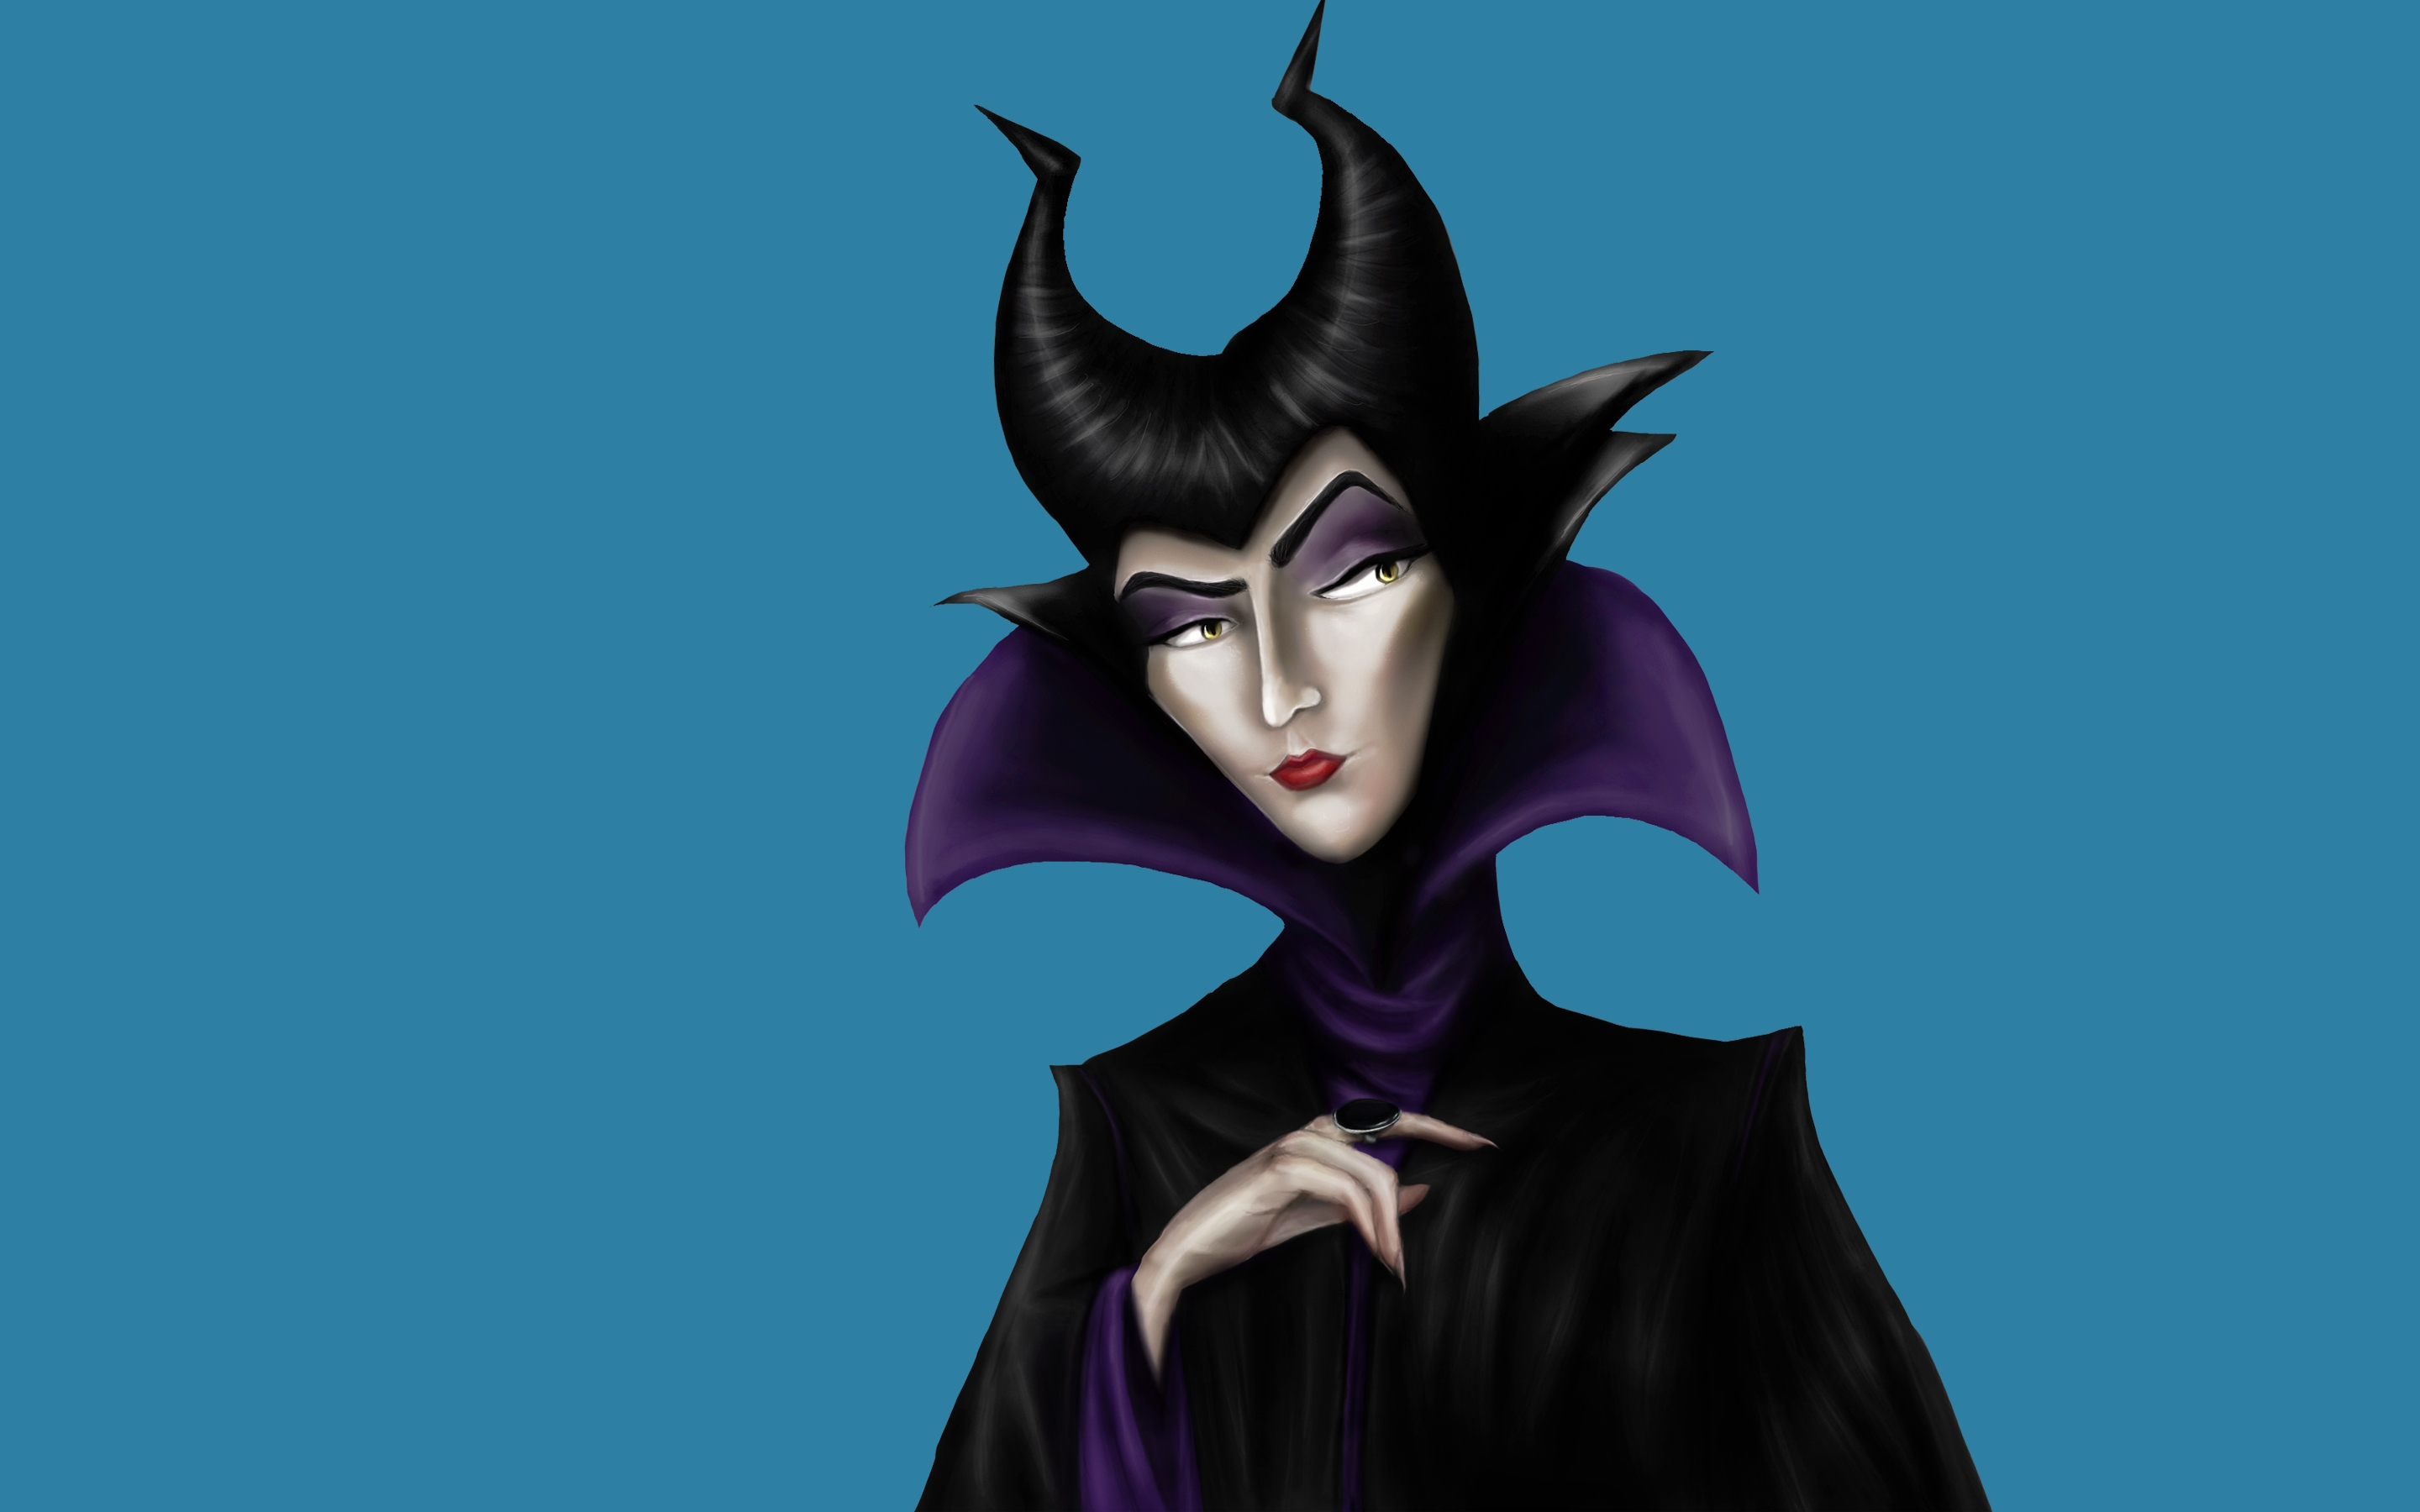 Maleficent Drawing for 2880 x 1800 Retina Display resolution